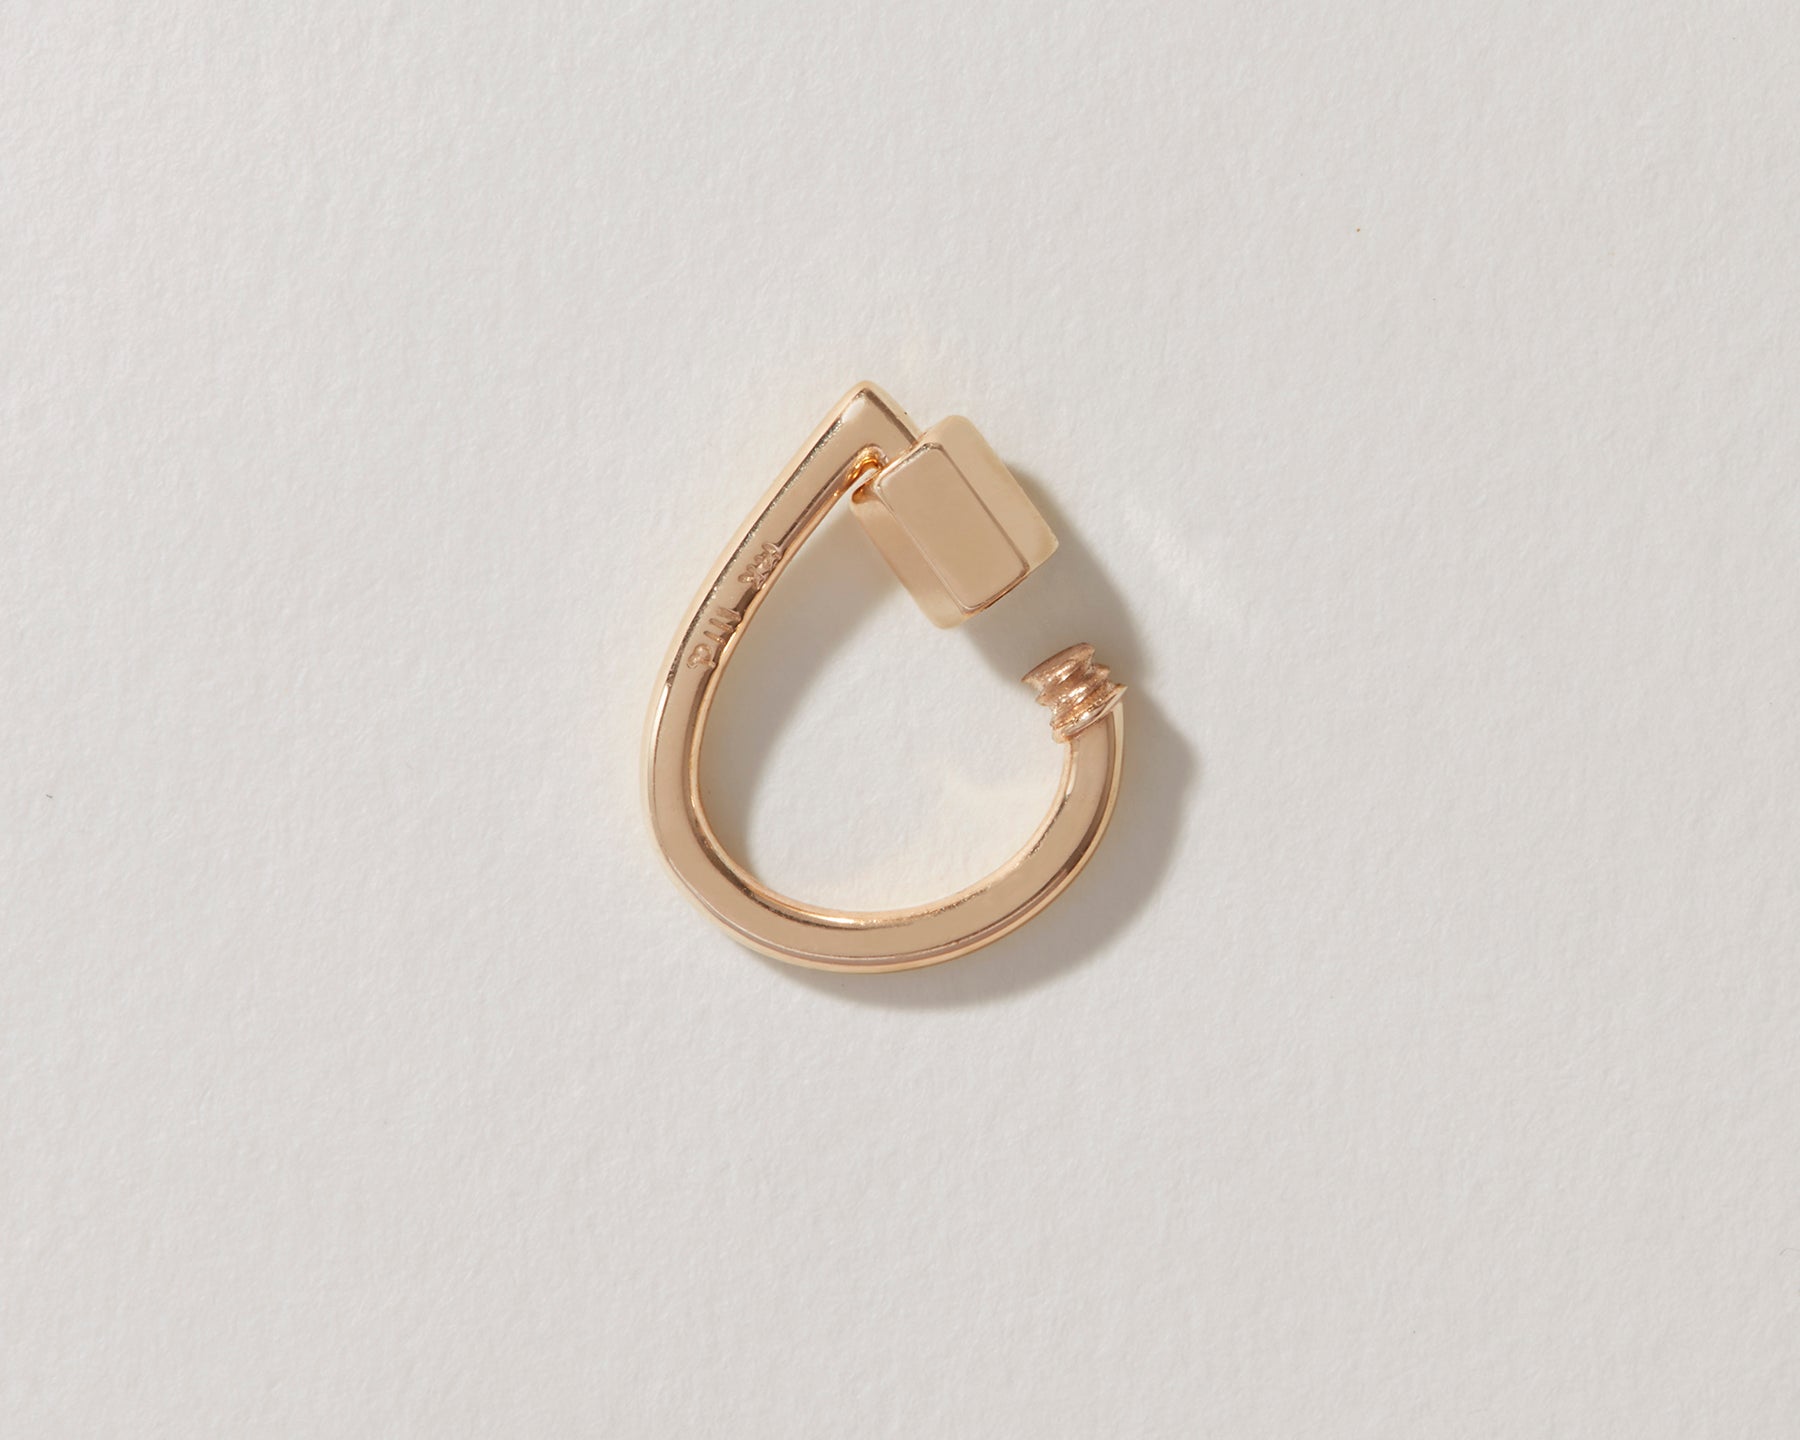 Rose gold small teardrop charm with open clasp